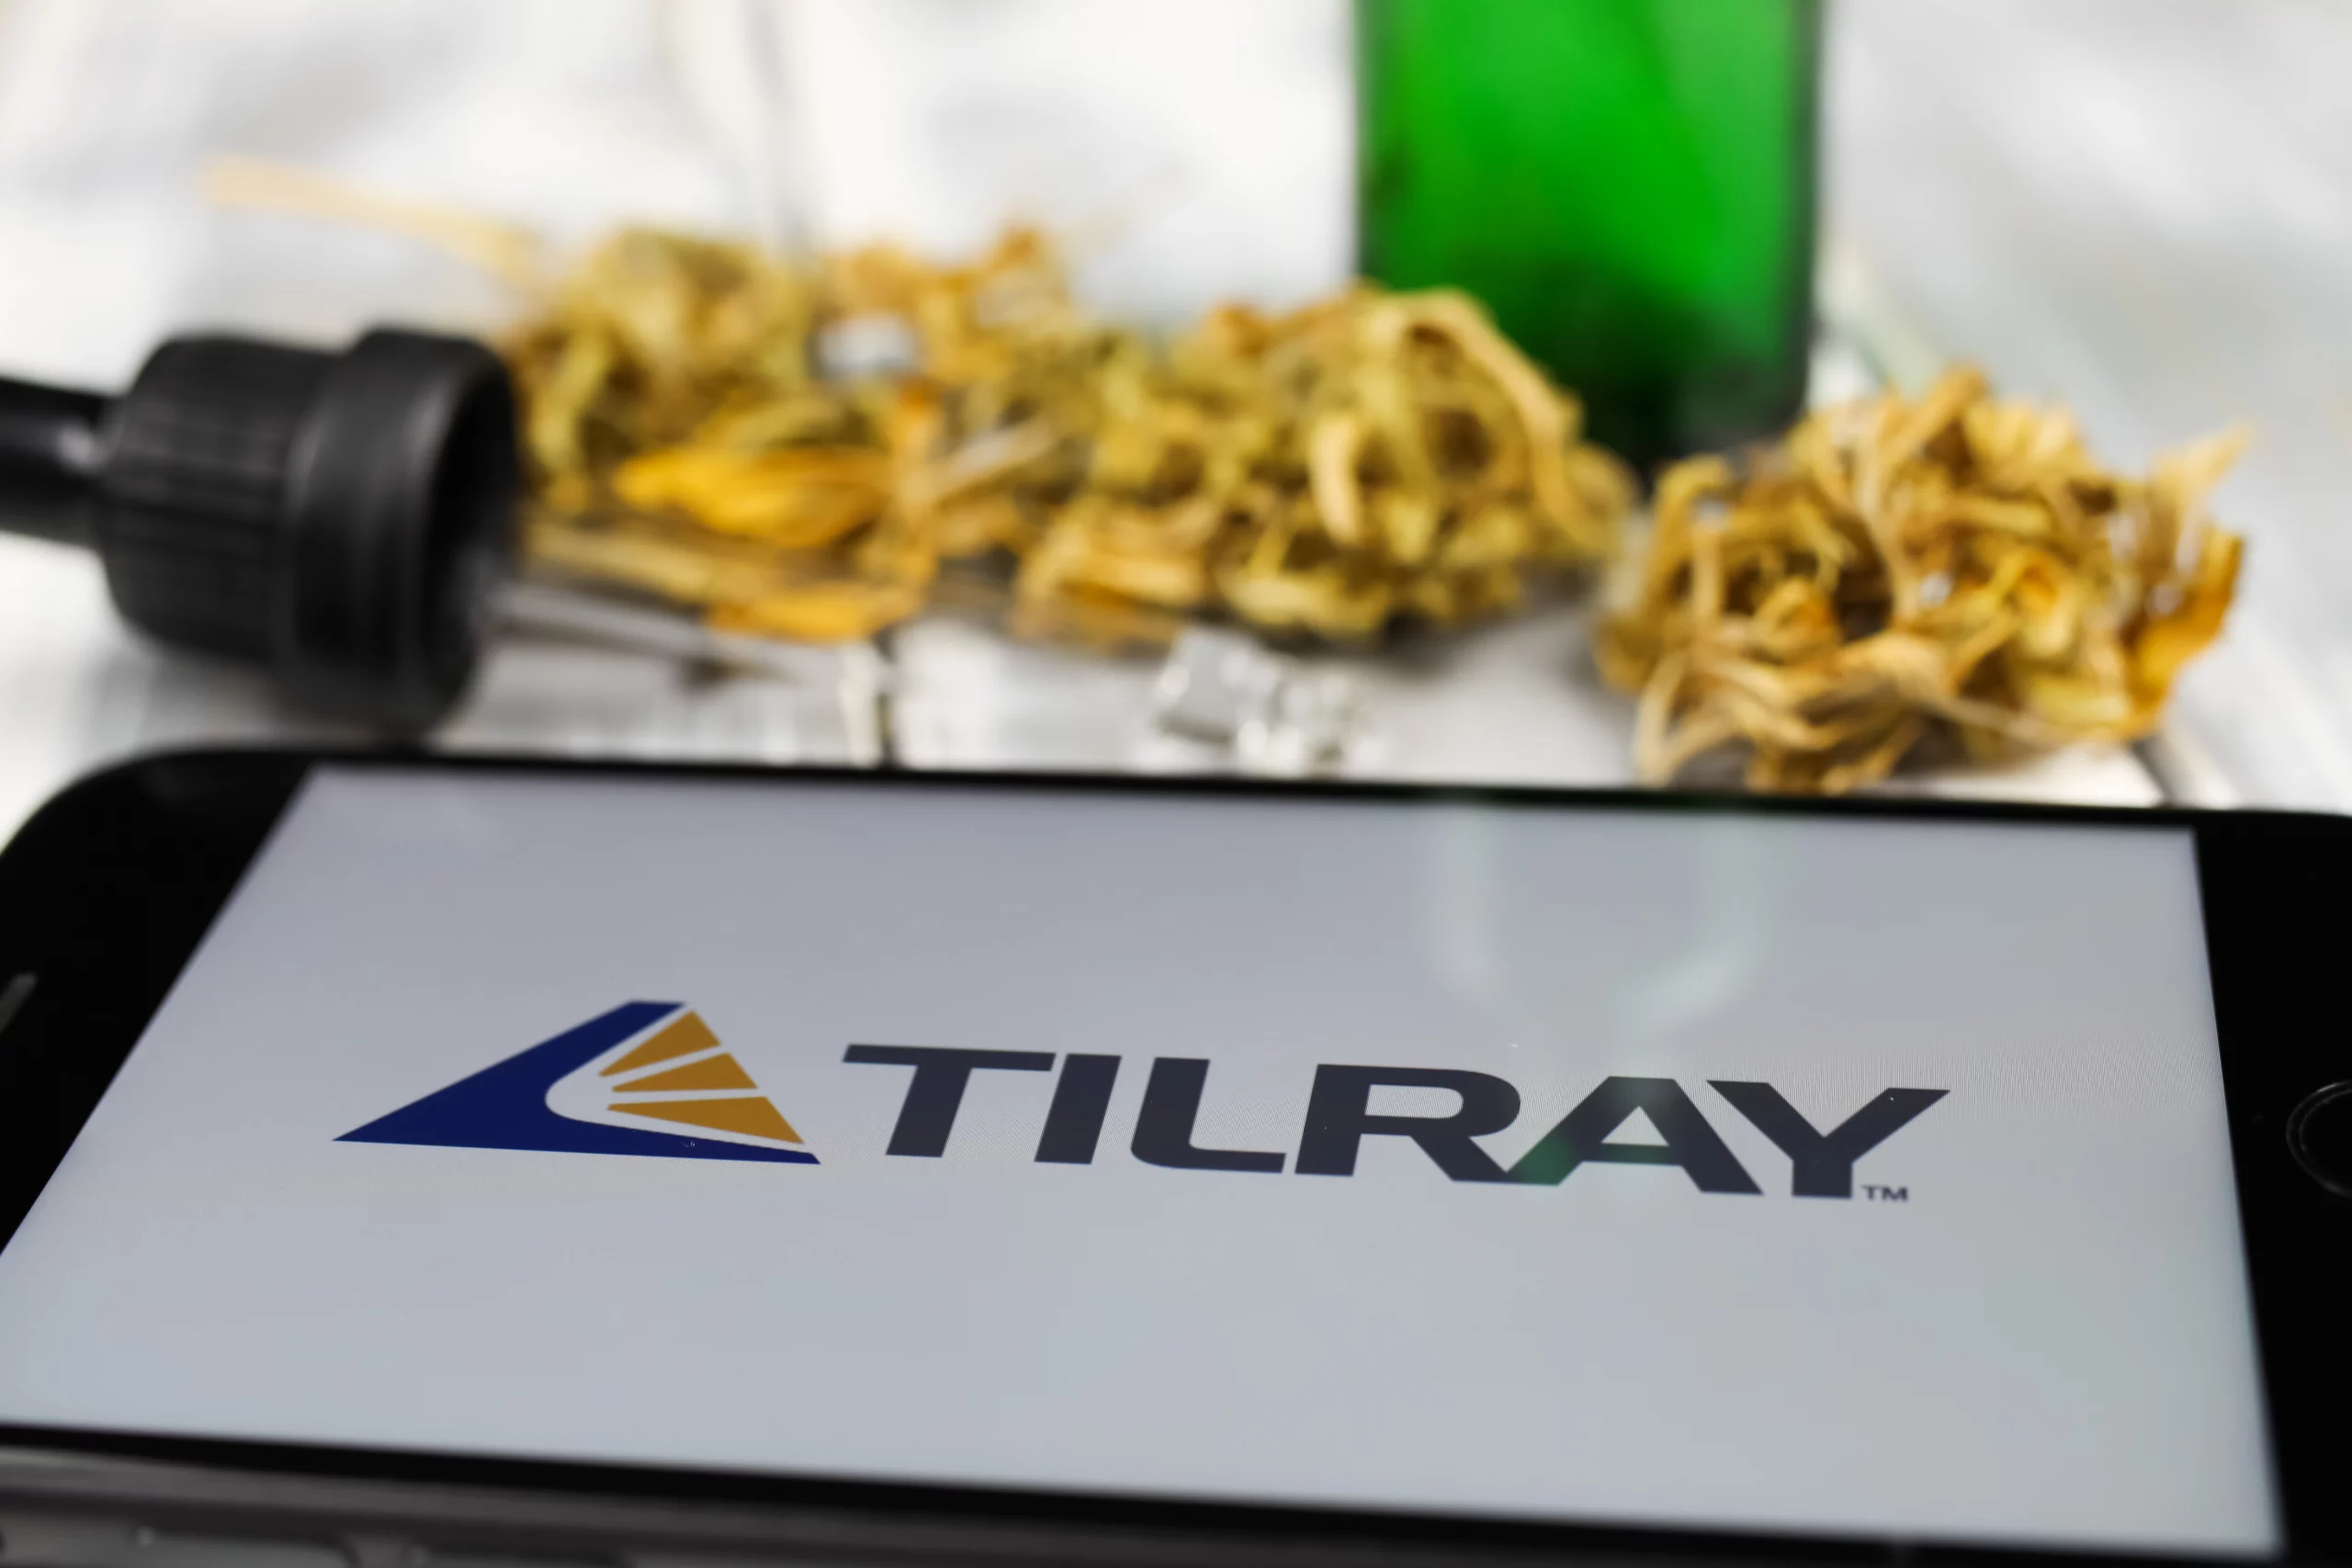 Tilray to Acquire 8 Anheuser-Busch Brands for $85M